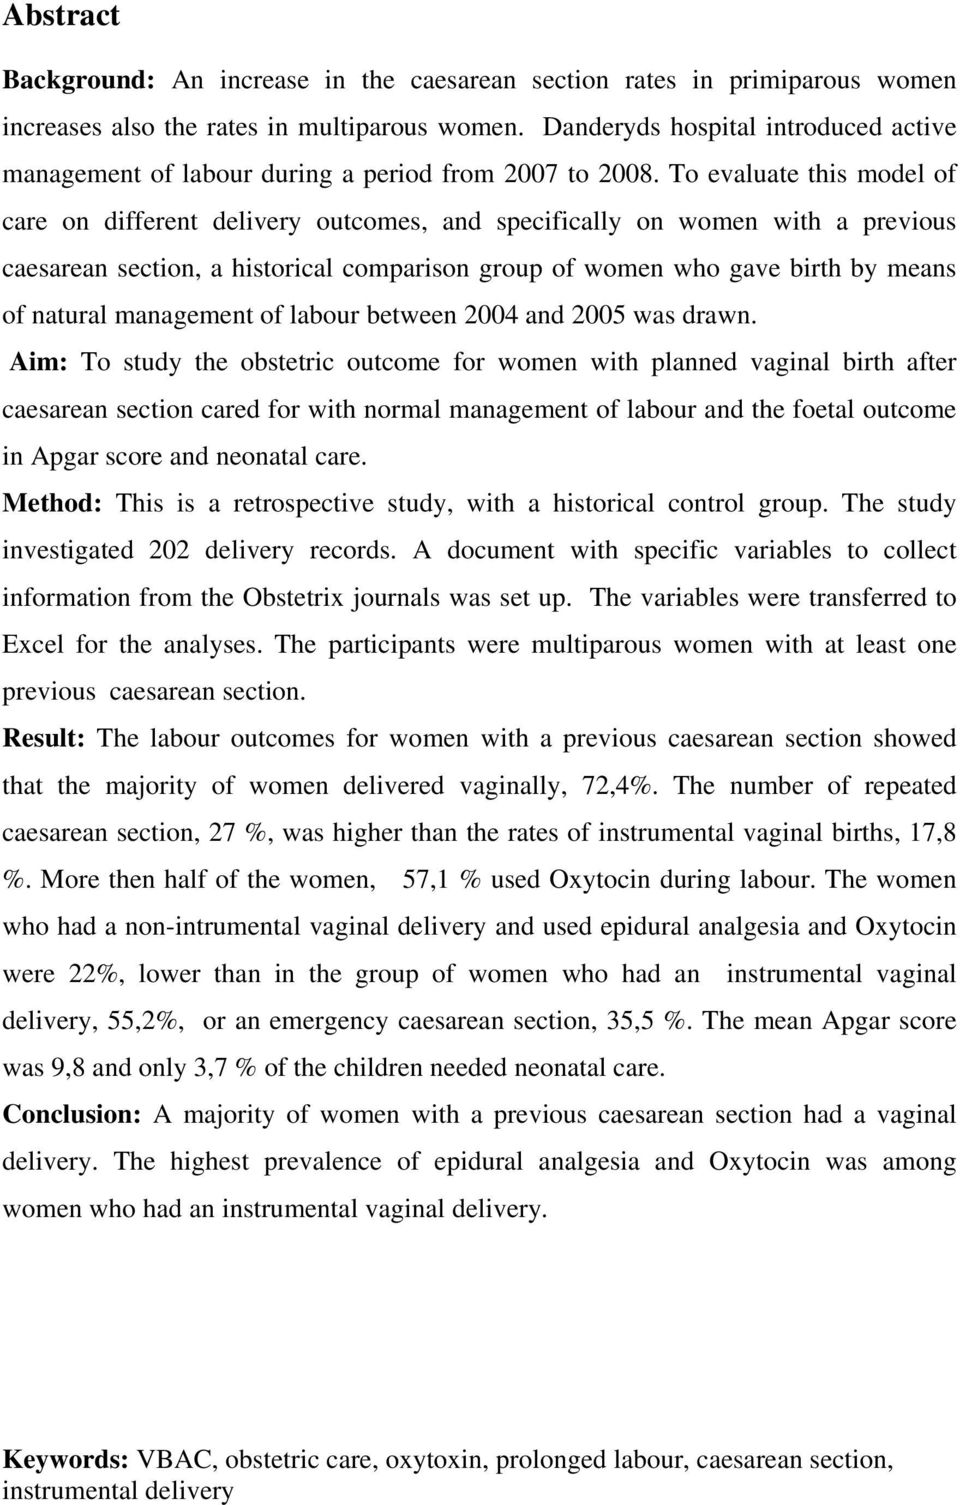 To evaluate this model of care on different delivery outcomes, and specifically on women with a previous caesarean section, a historical comparison group of women who gave birth by means of natural